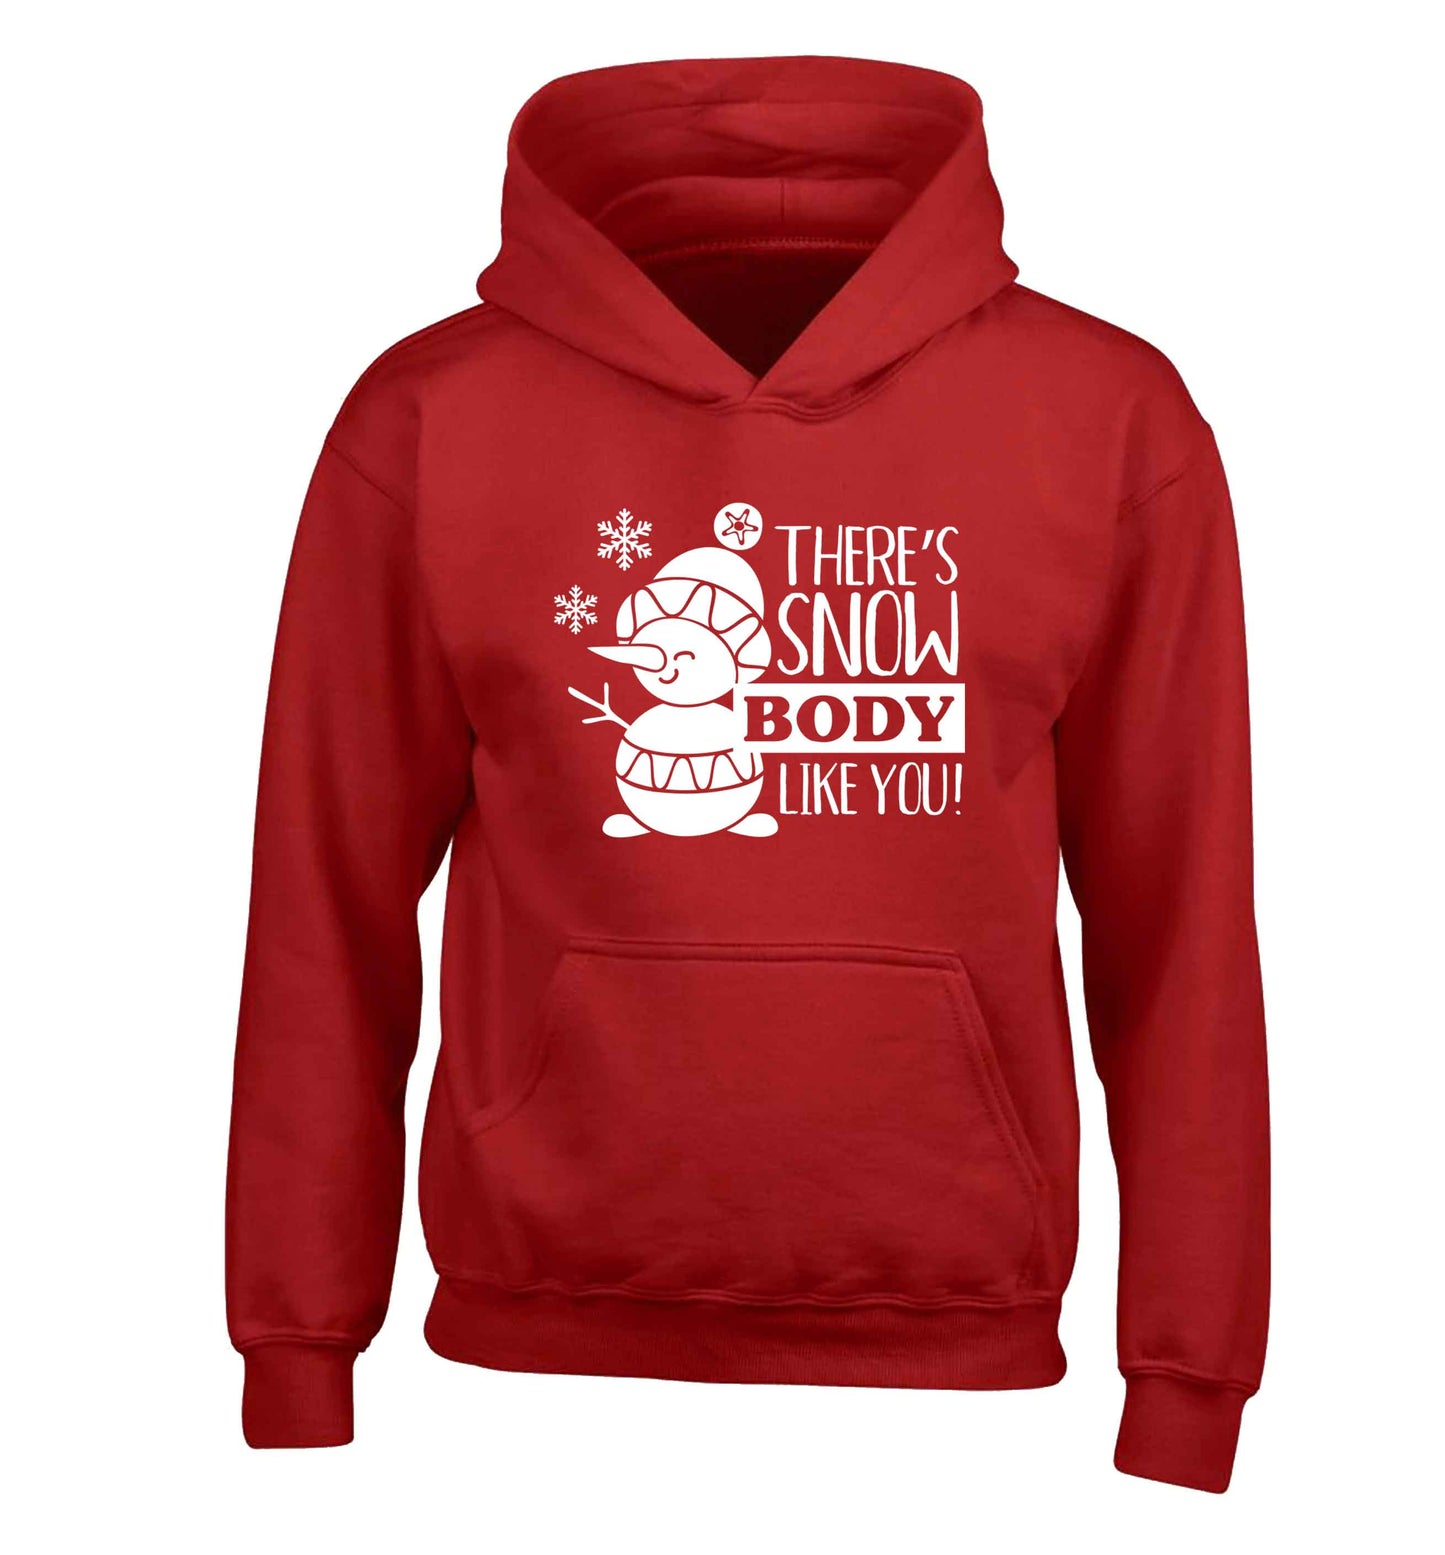 There's snow body like you children's red hoodie 12-13 Years